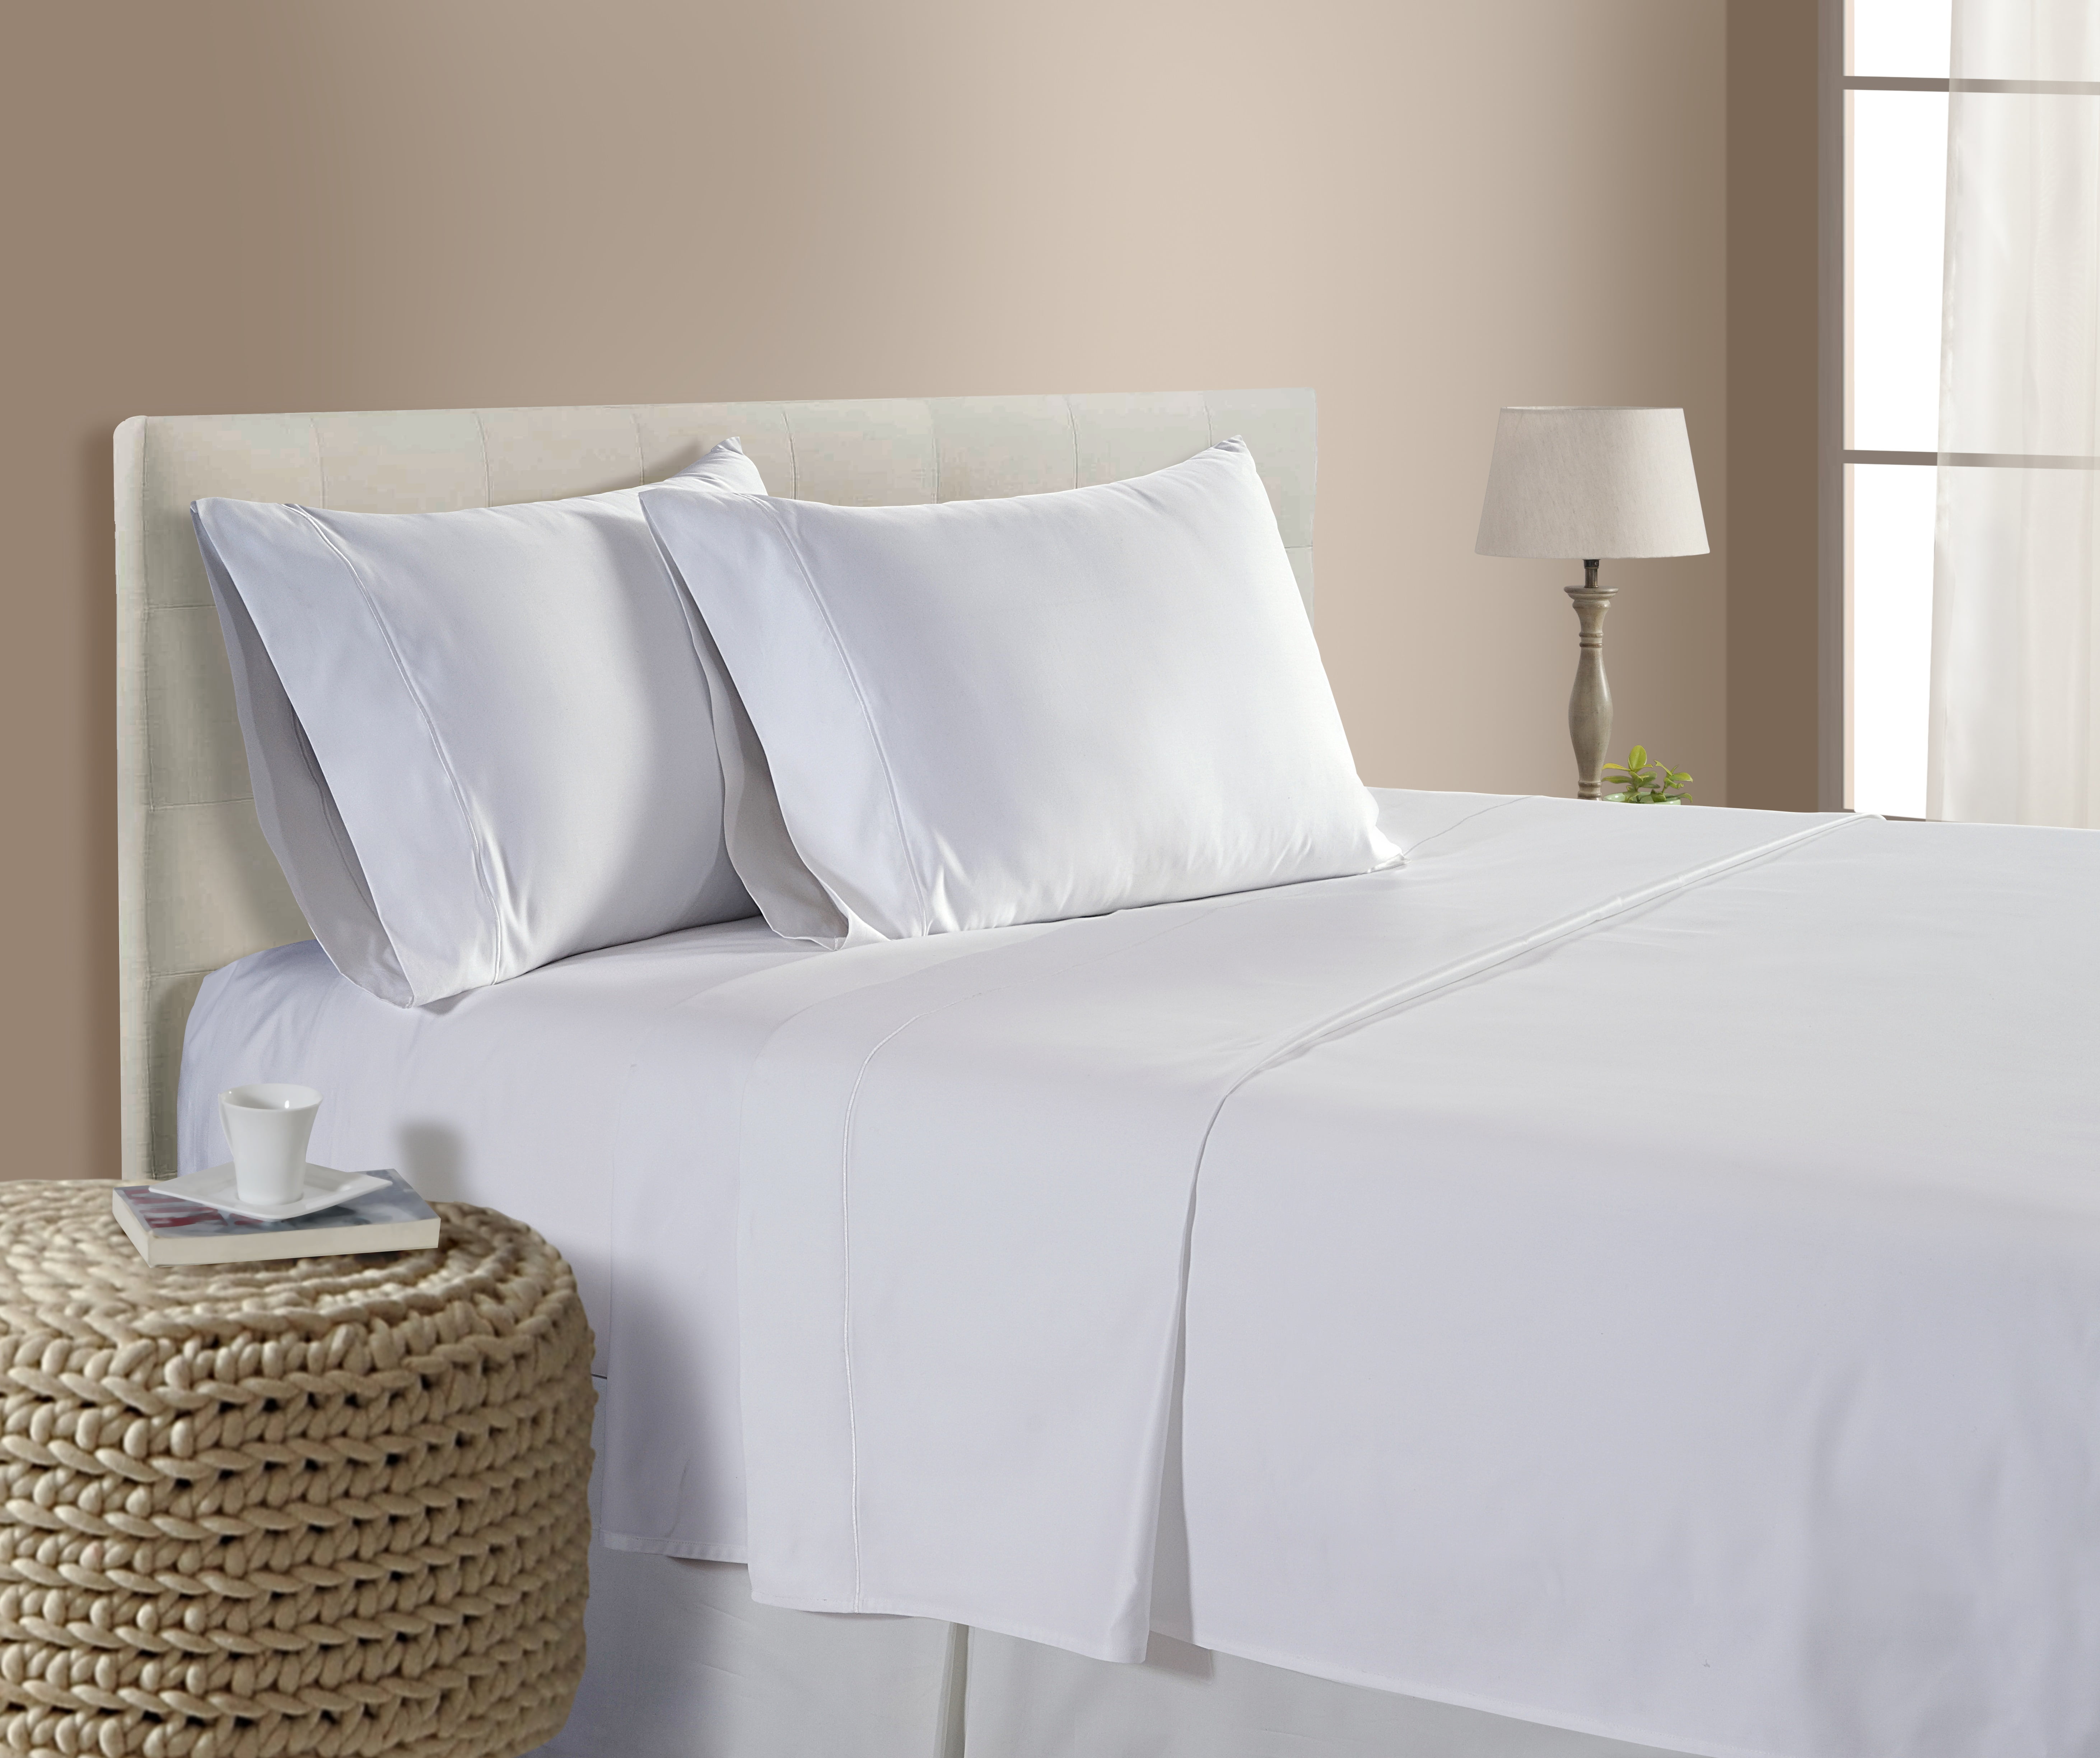 All Colors & Size Available Bedding 4 PC Sheet Set 800 TC Egyptian Cotton 